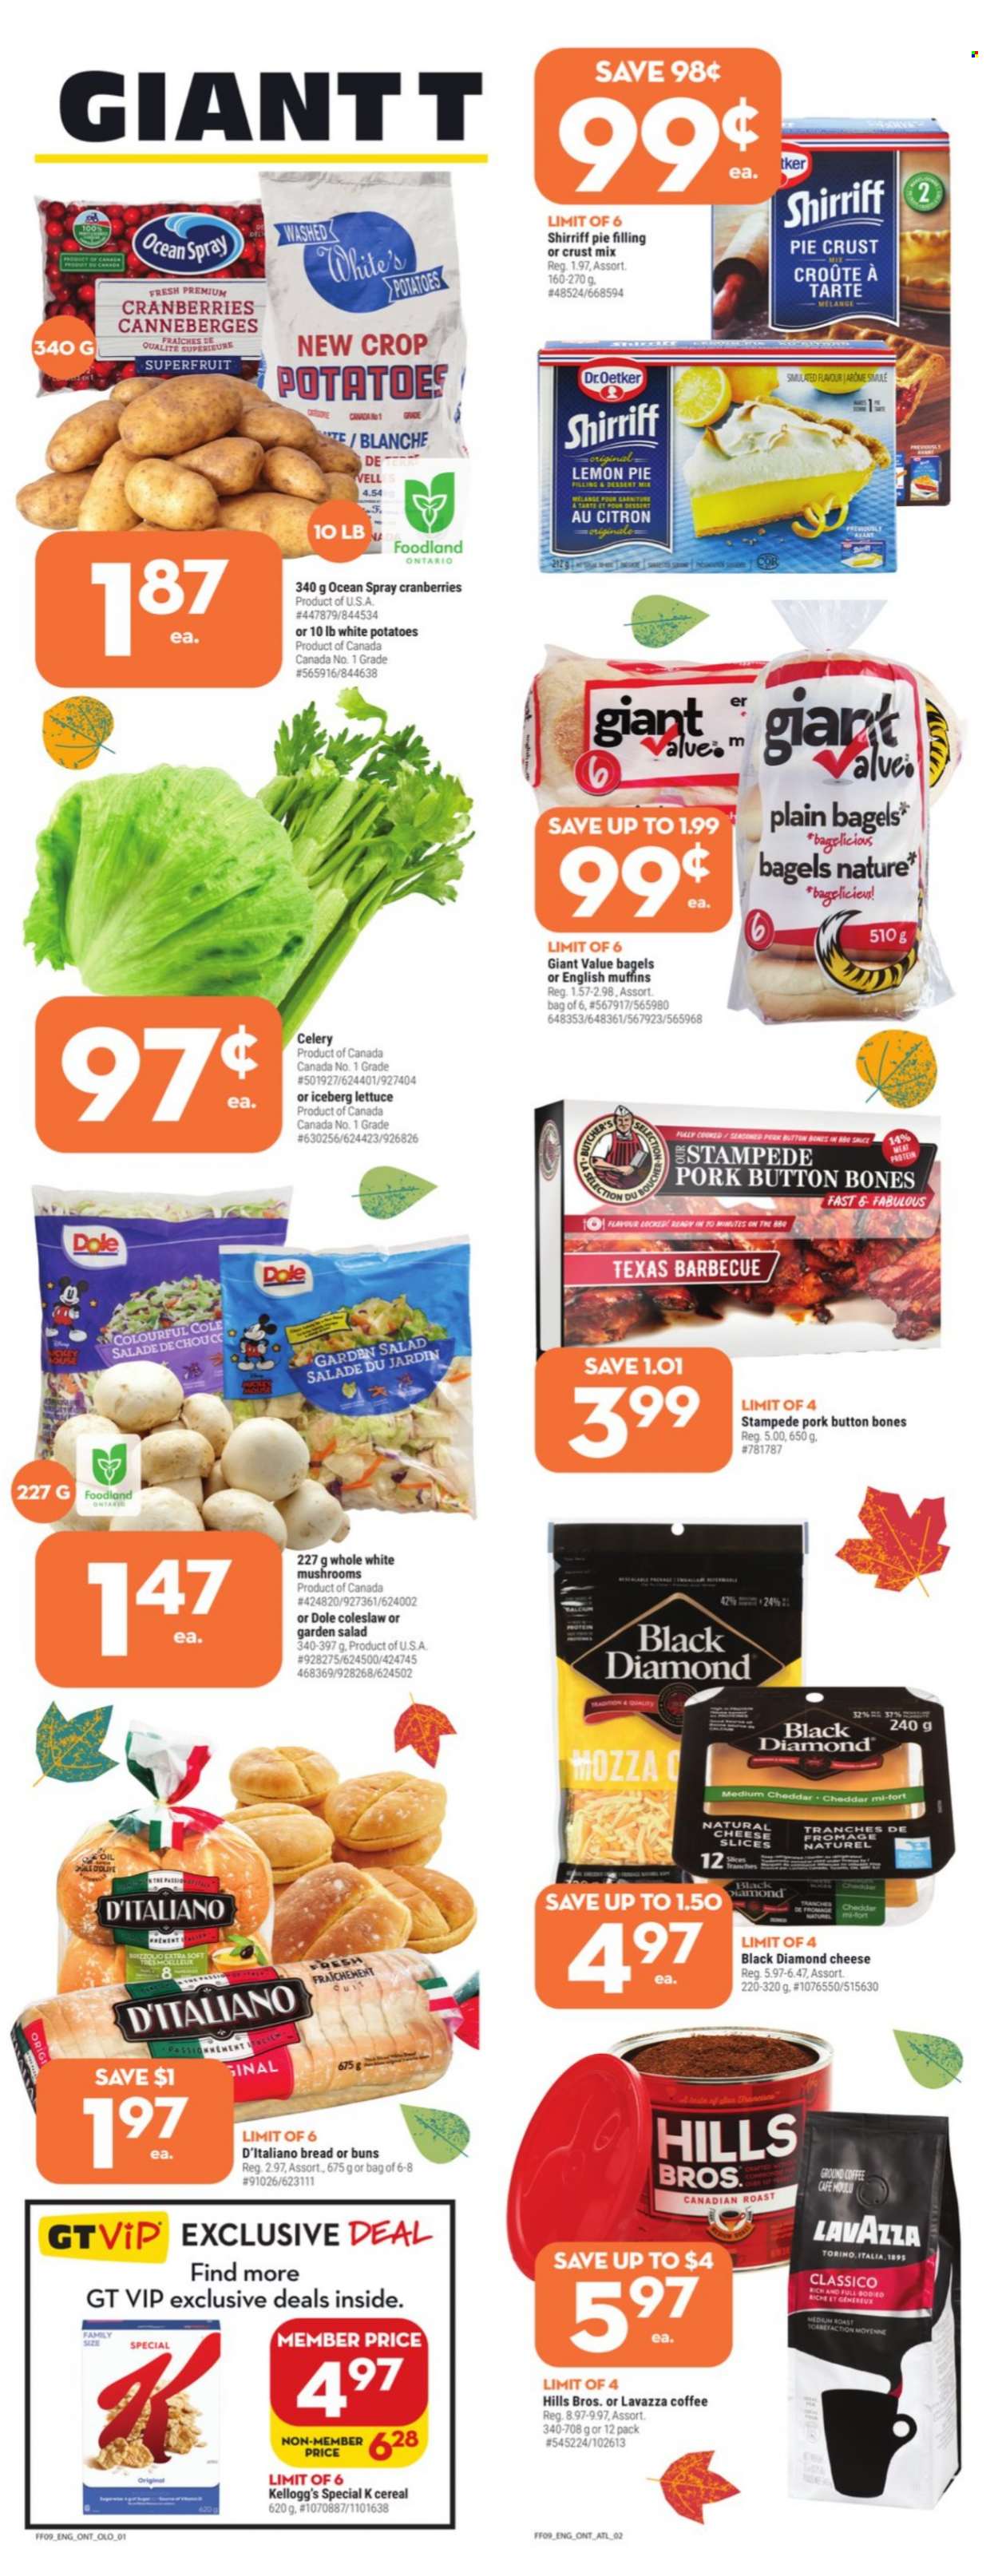 thumbnail - Giant Tiger Flyer - September 29, 2021 - October 05, 2021 - Sales products - bagels, bread, english muffins, buns, celery, potatoes, salad, Dole, coleslaw, sliced cheese, cheddar, cheese, Dr. Oetker, Kellogg's, pie crust, pie filling, cranberries, cereals, Classico, coffee, ground coffee, Lavazza, Hill's. Page 2.